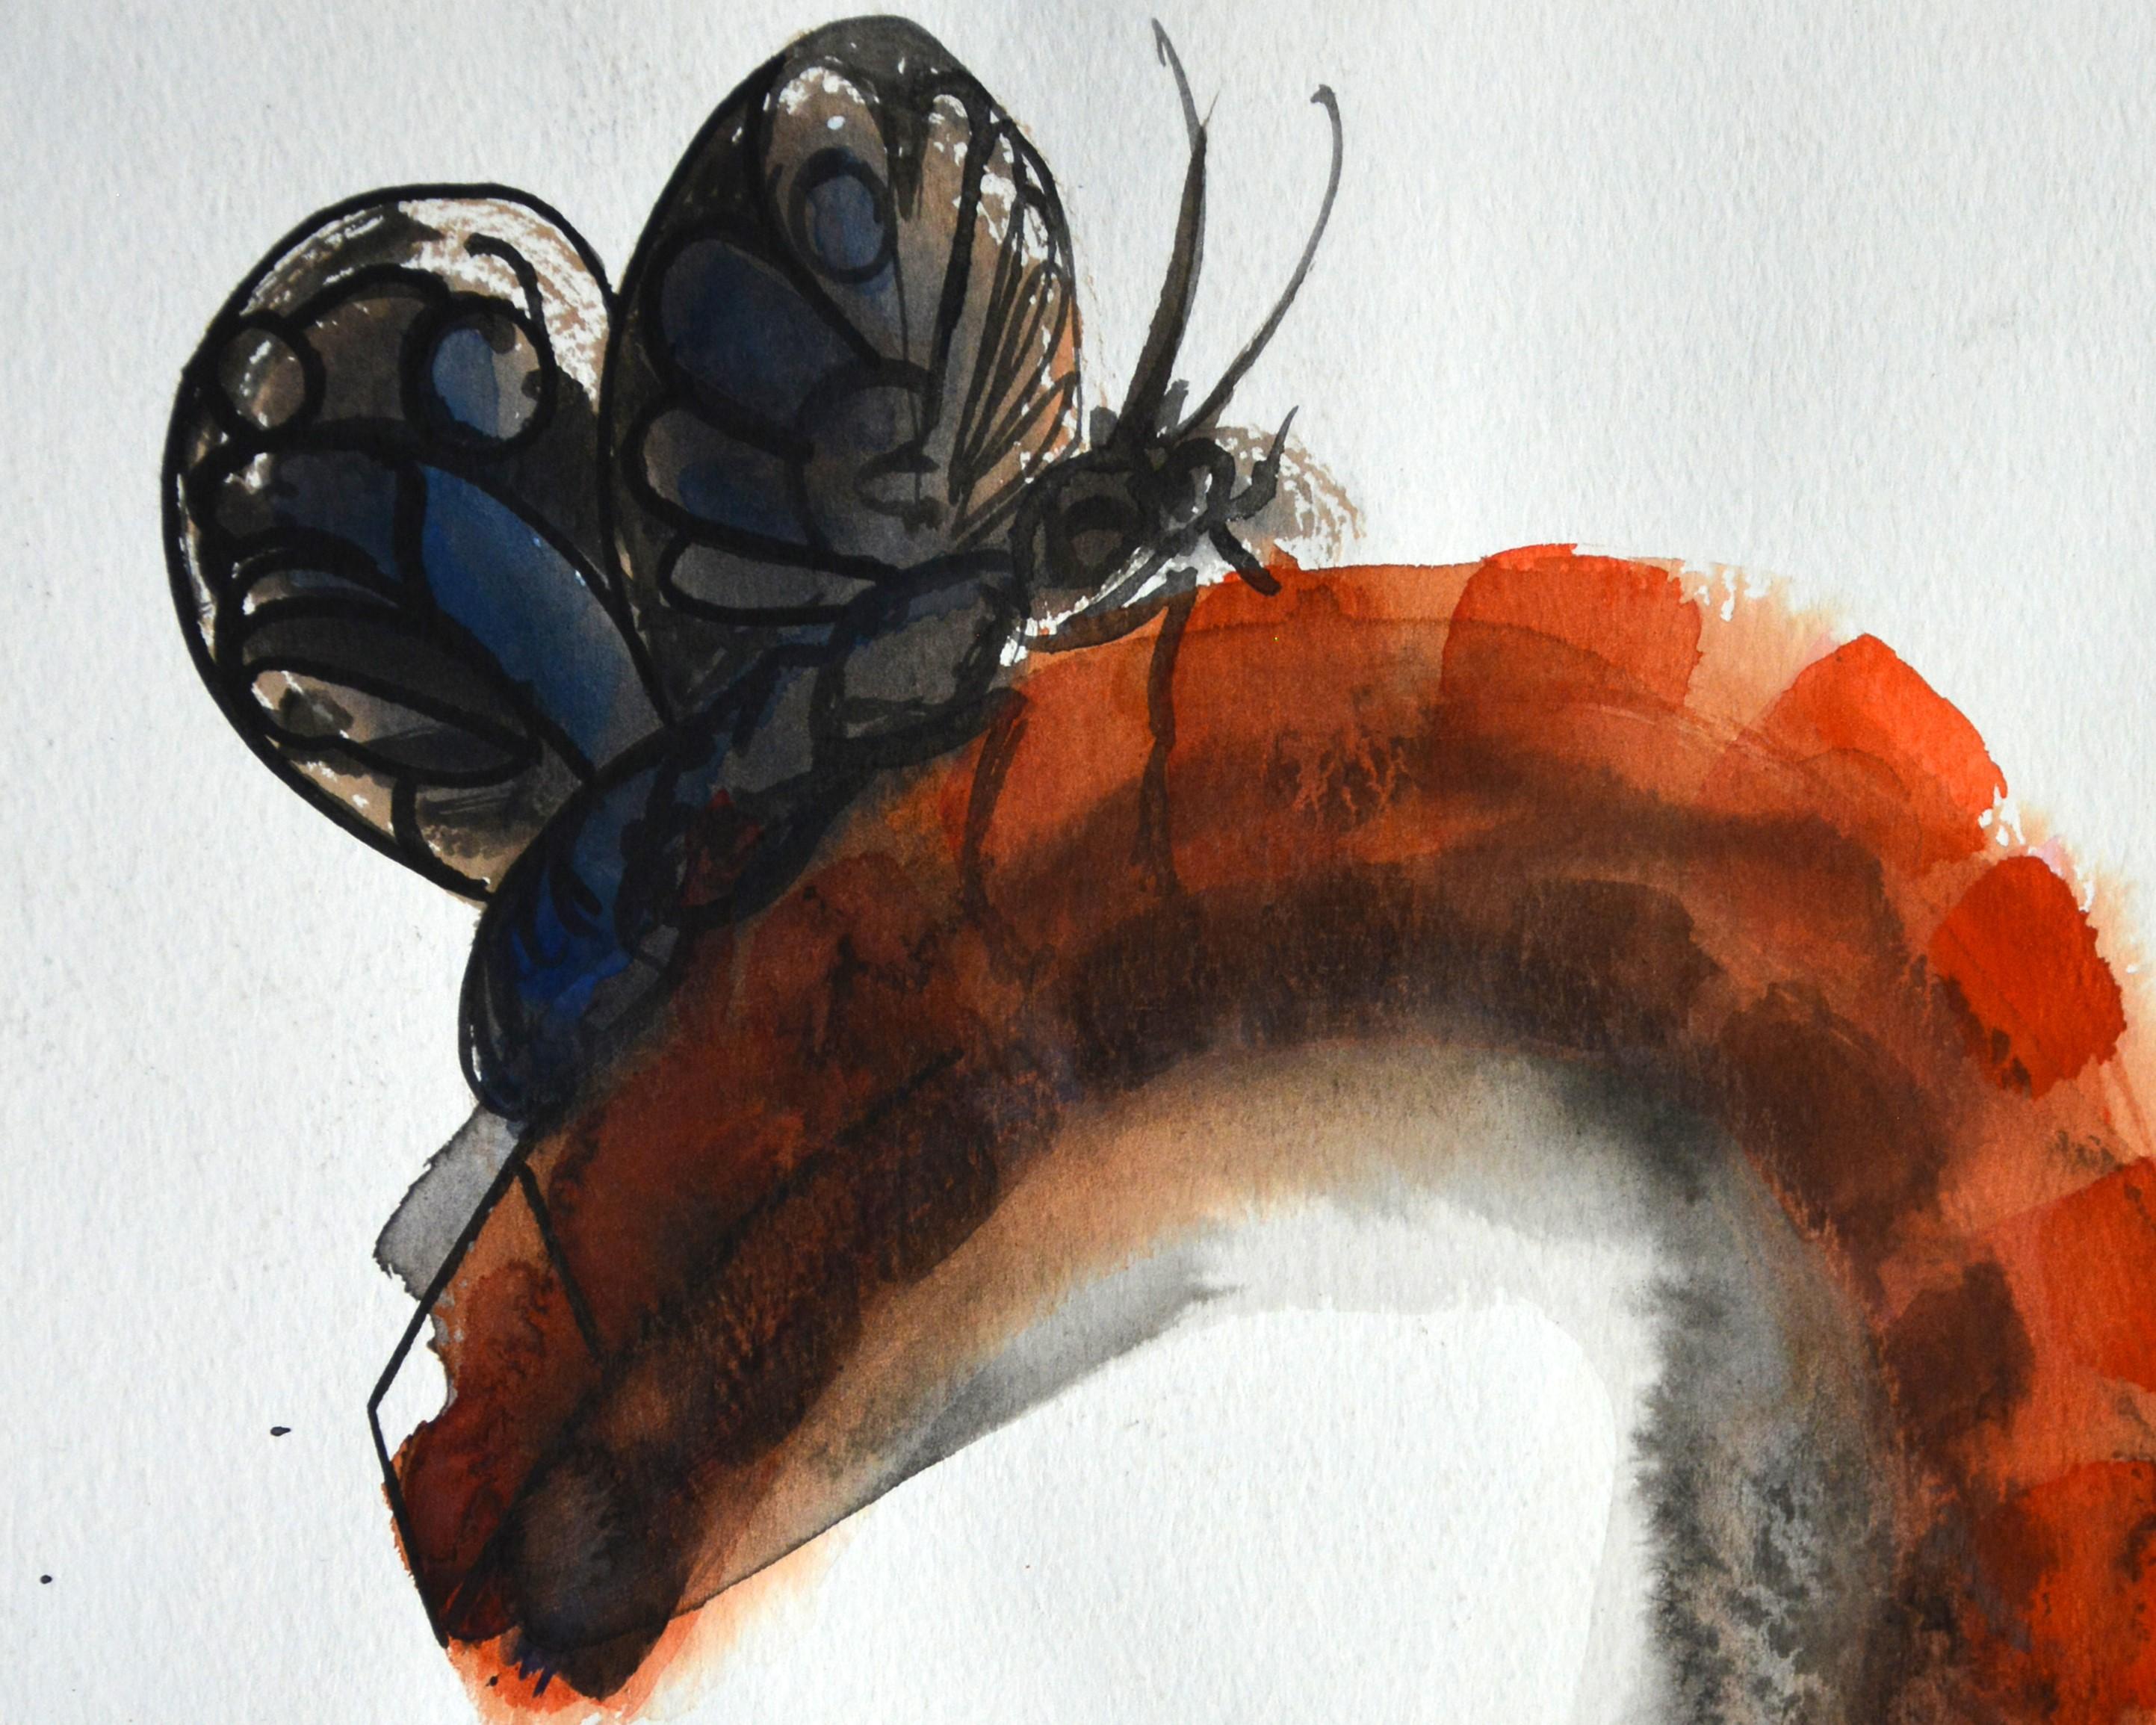 Luis Miguel Valdes, ¨Mariposa-I¨, 1999, Work on paper, 15x11 in - Contemporary Art by Luis Miguel Valdes 